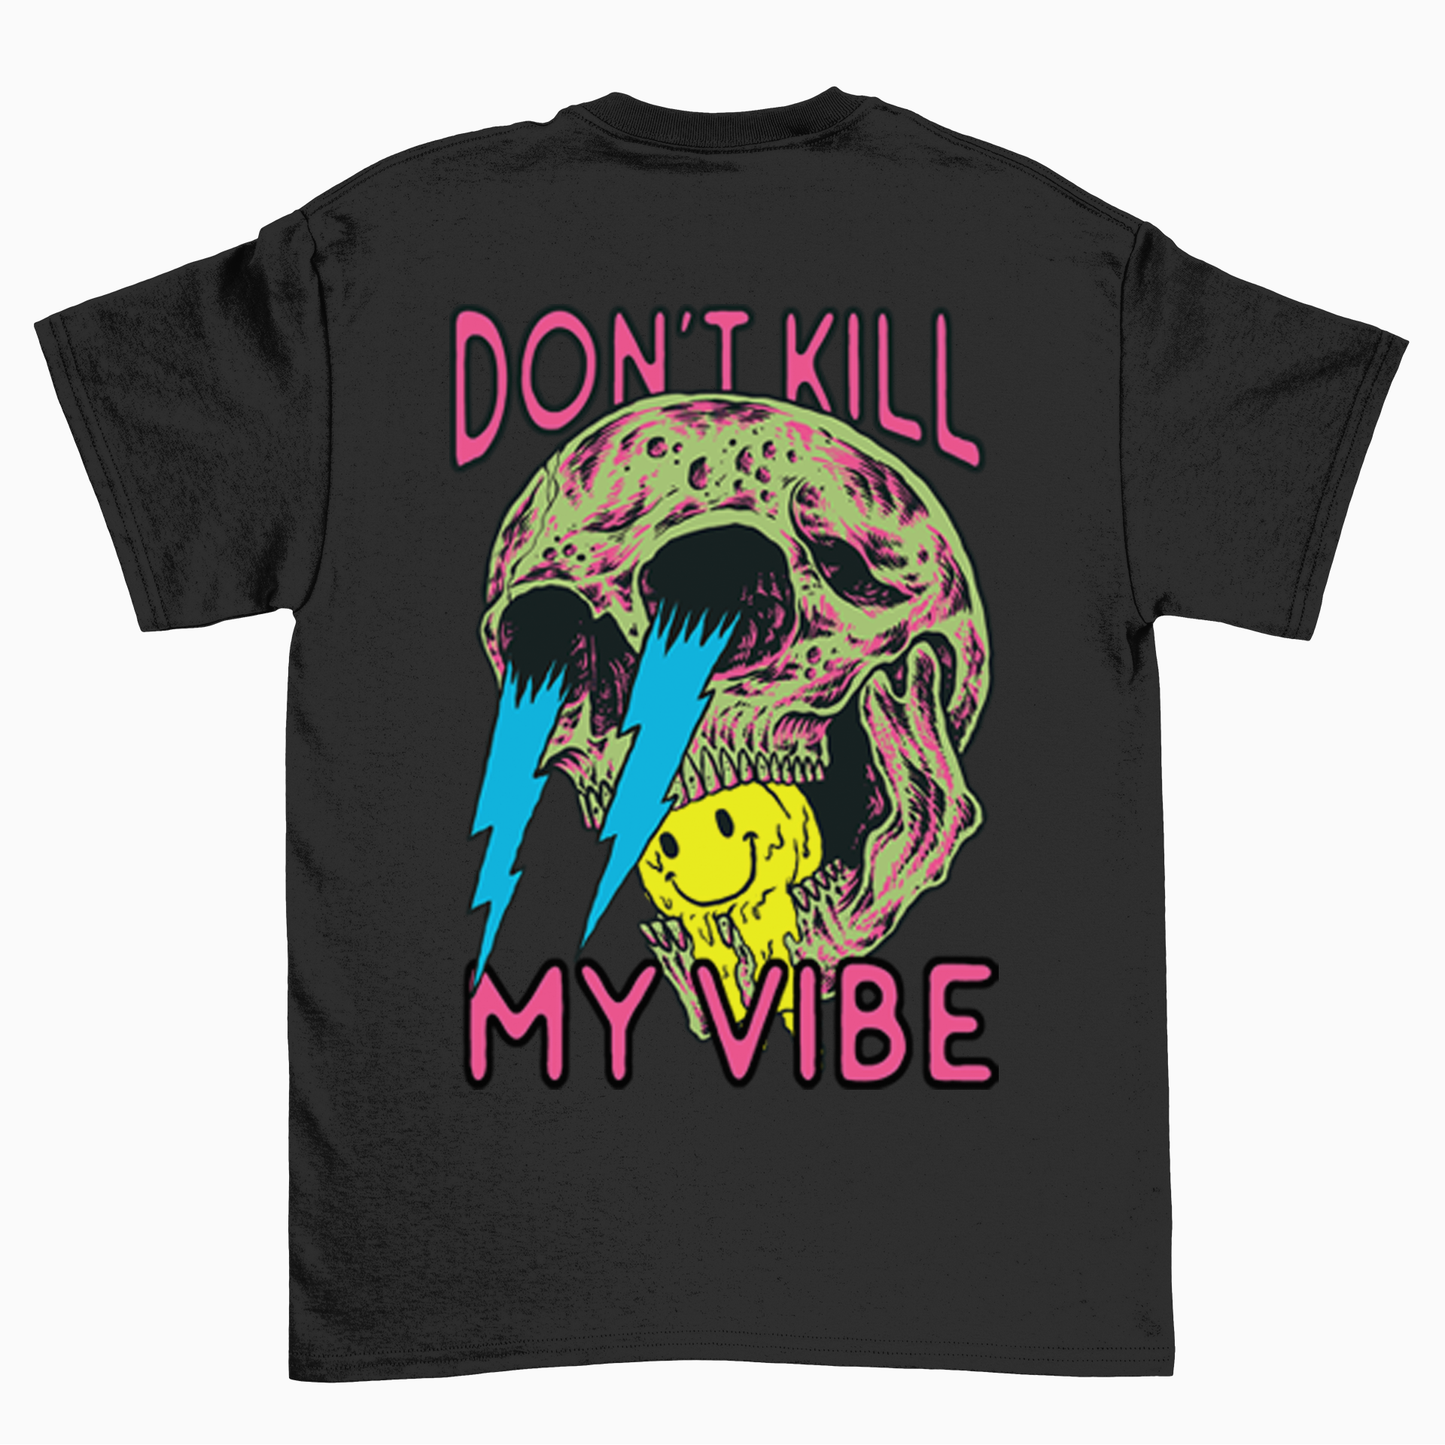 BZ01 Women's DON'T KILL MY VIBE Front and Back Regular Fit T-Shirt